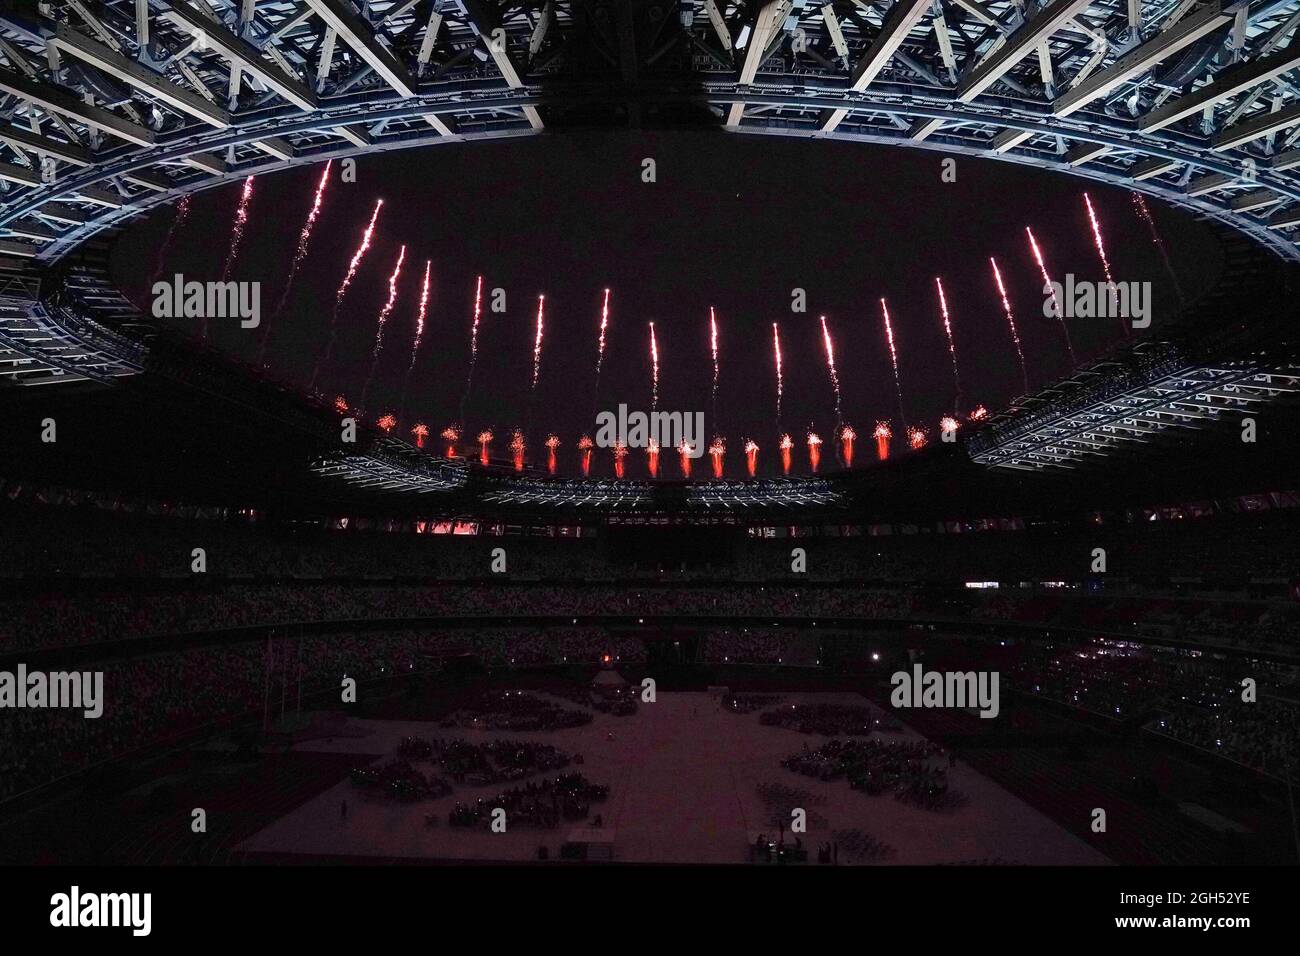 TOKYO, JAPAN - SEPTEMBER 5:  Fireworks during the Closing Ceremony of the Tokyo 2020 Paralympic Games at Olympic Stadium on September 5, 2021 in Tokyo, Japan (Photo by Helene Wiesenhaan/Orange Pictures) NOCNSF Atletiekunie Credit: Orange Pics BV/Alamy Live News Stock Photo